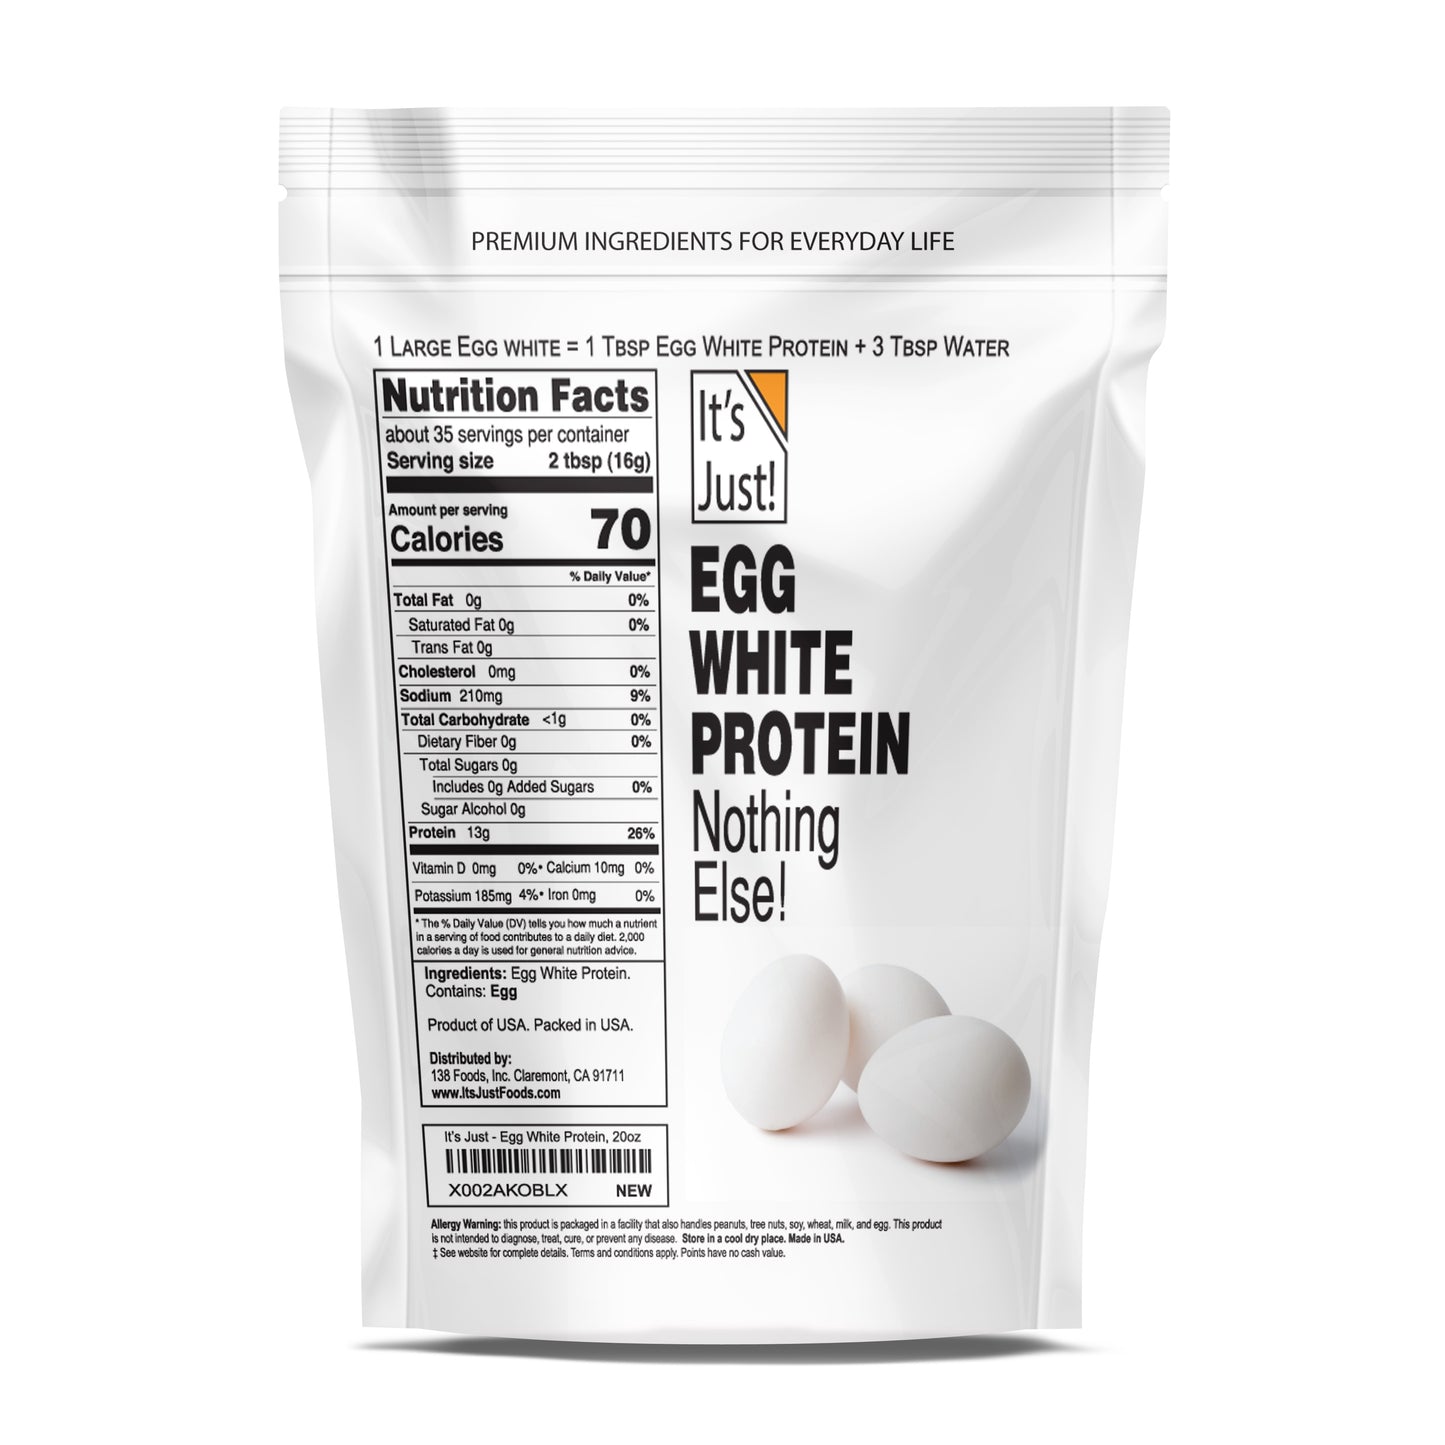 It's Just! - Egg White Protein